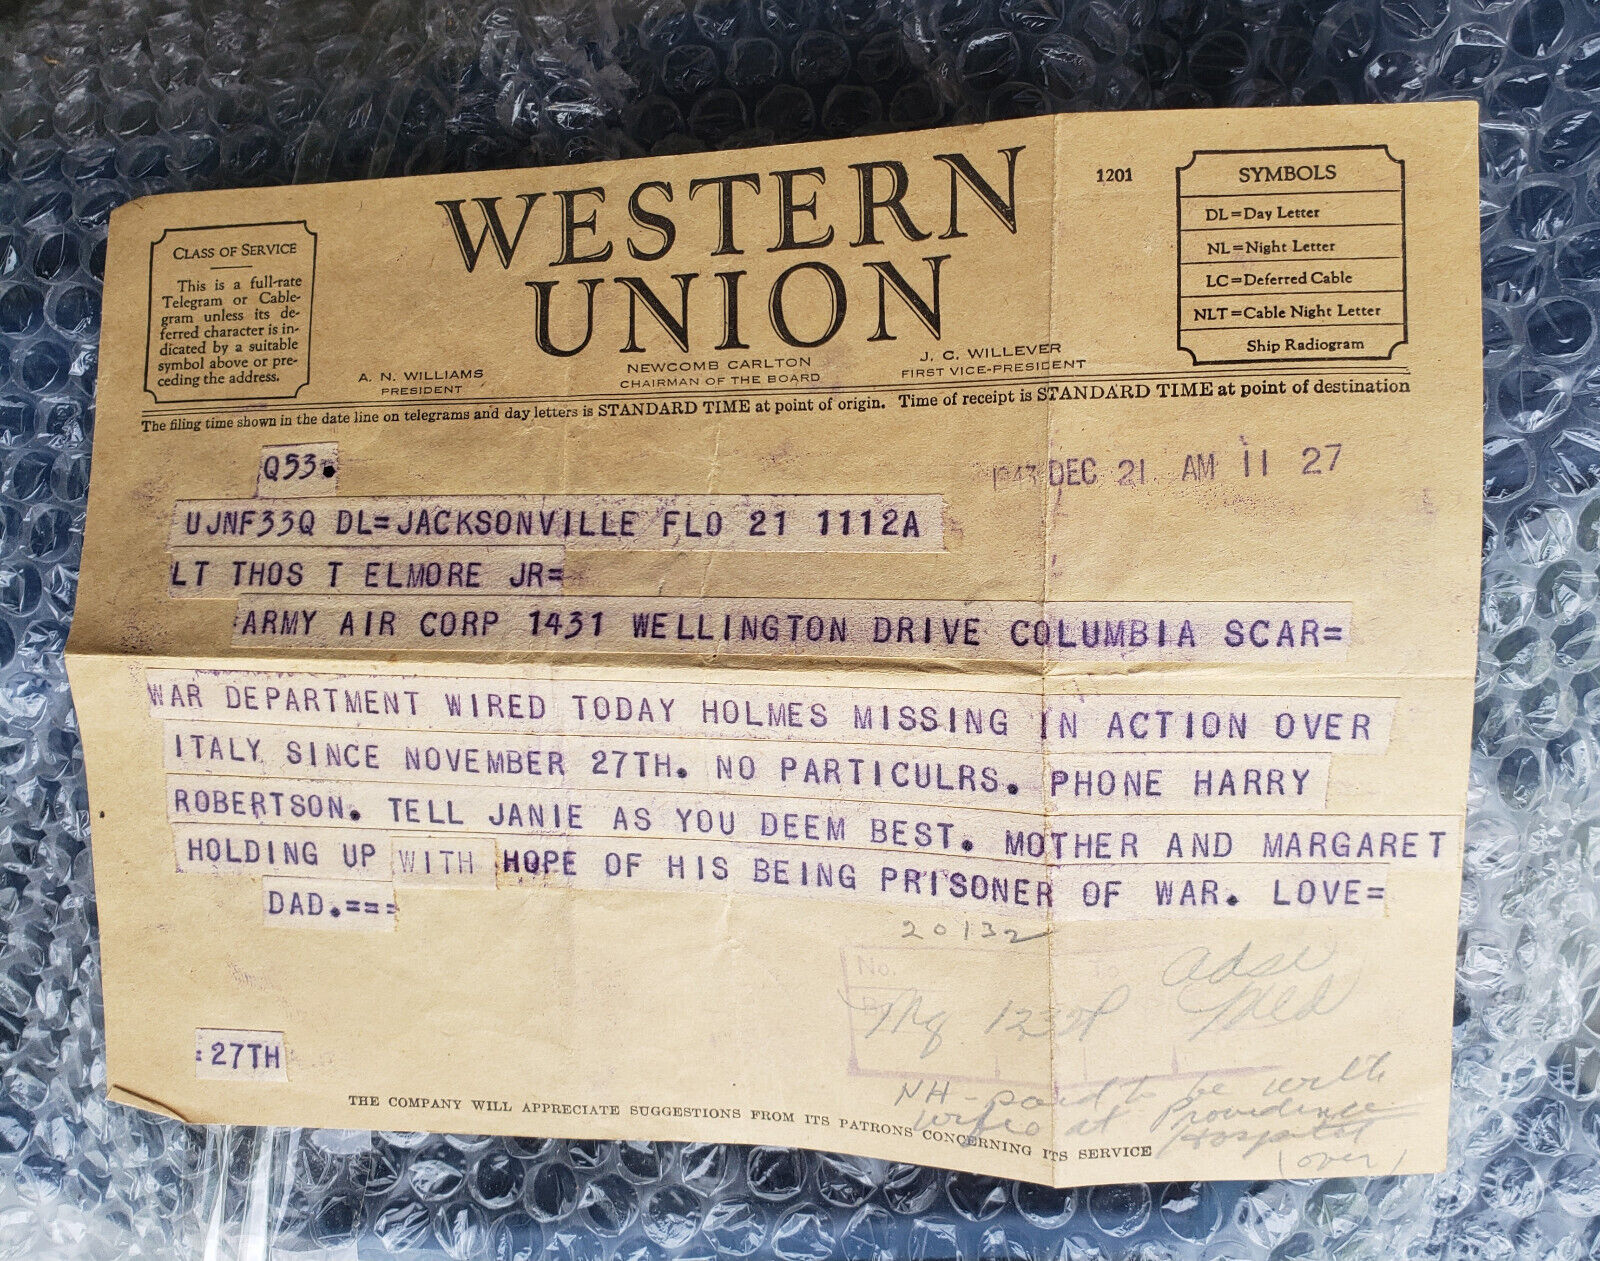 Original WWII US SOLDIER MISSING IN ACTION 1943 WESTERN UNION TELEGRAM SENT HOME